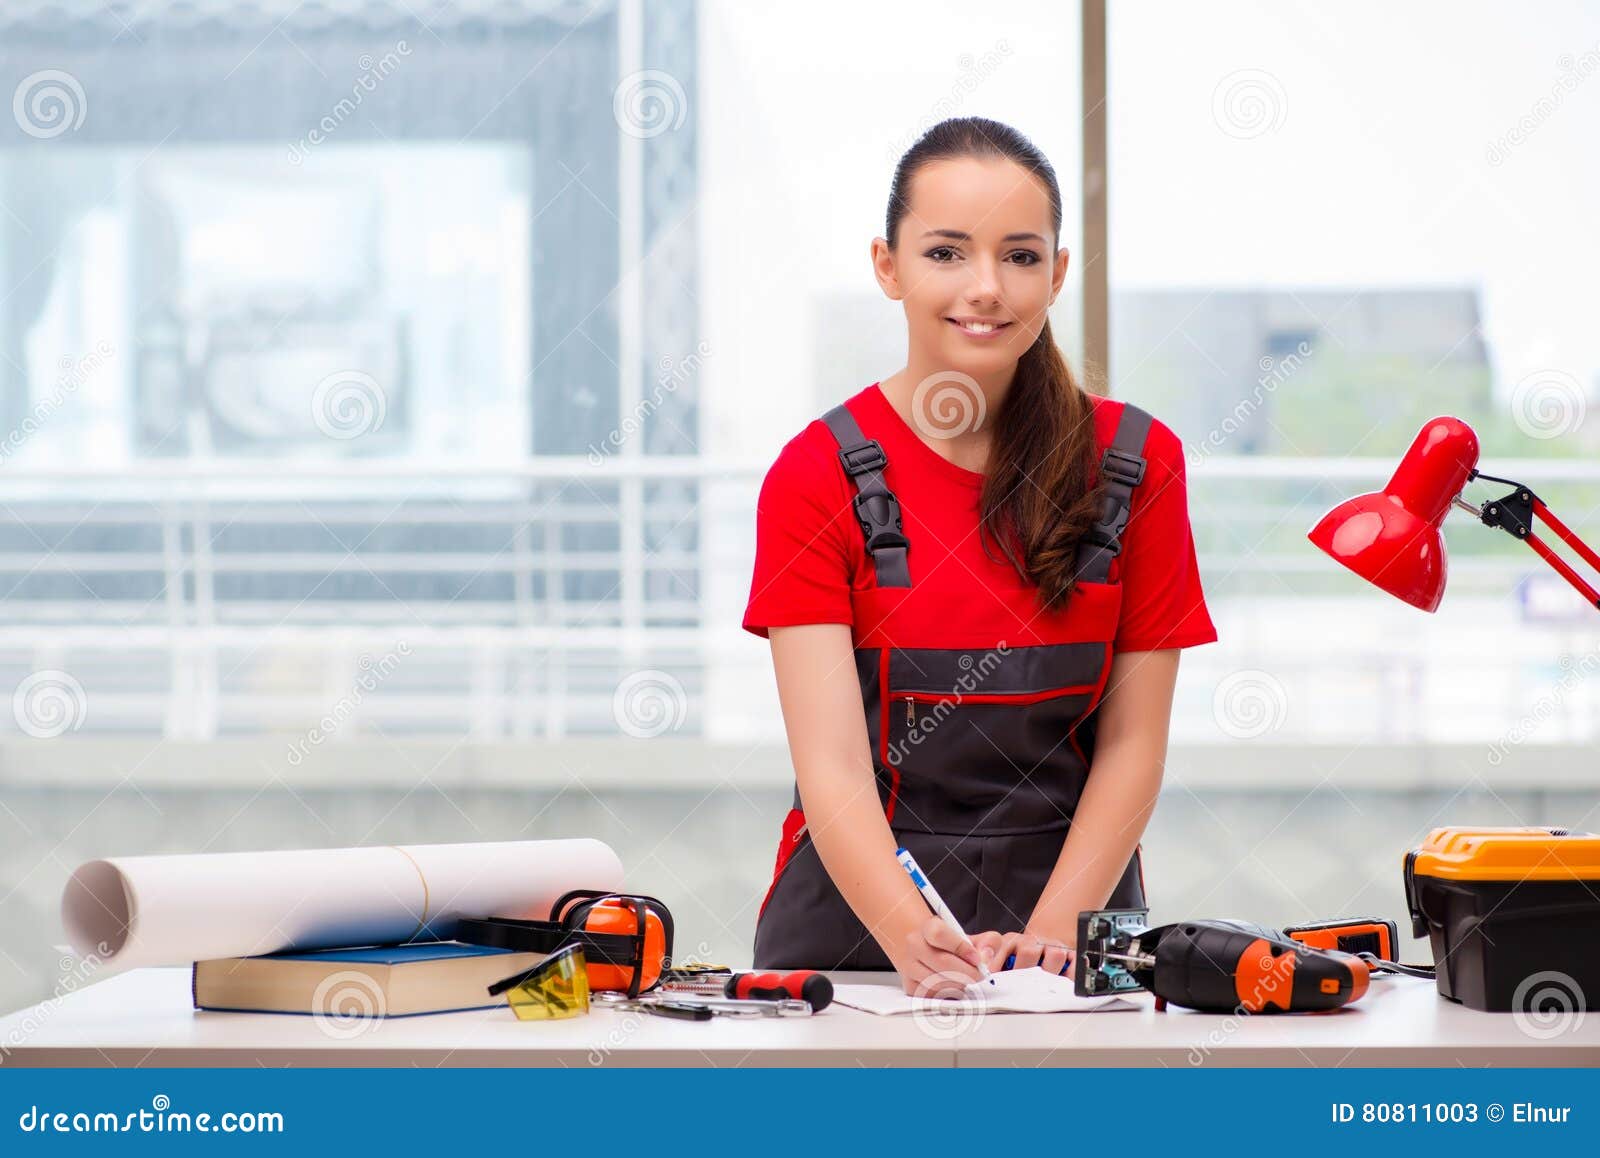 The Young Woman in Coveralls Doing Repairs Stock Image - Image of ...